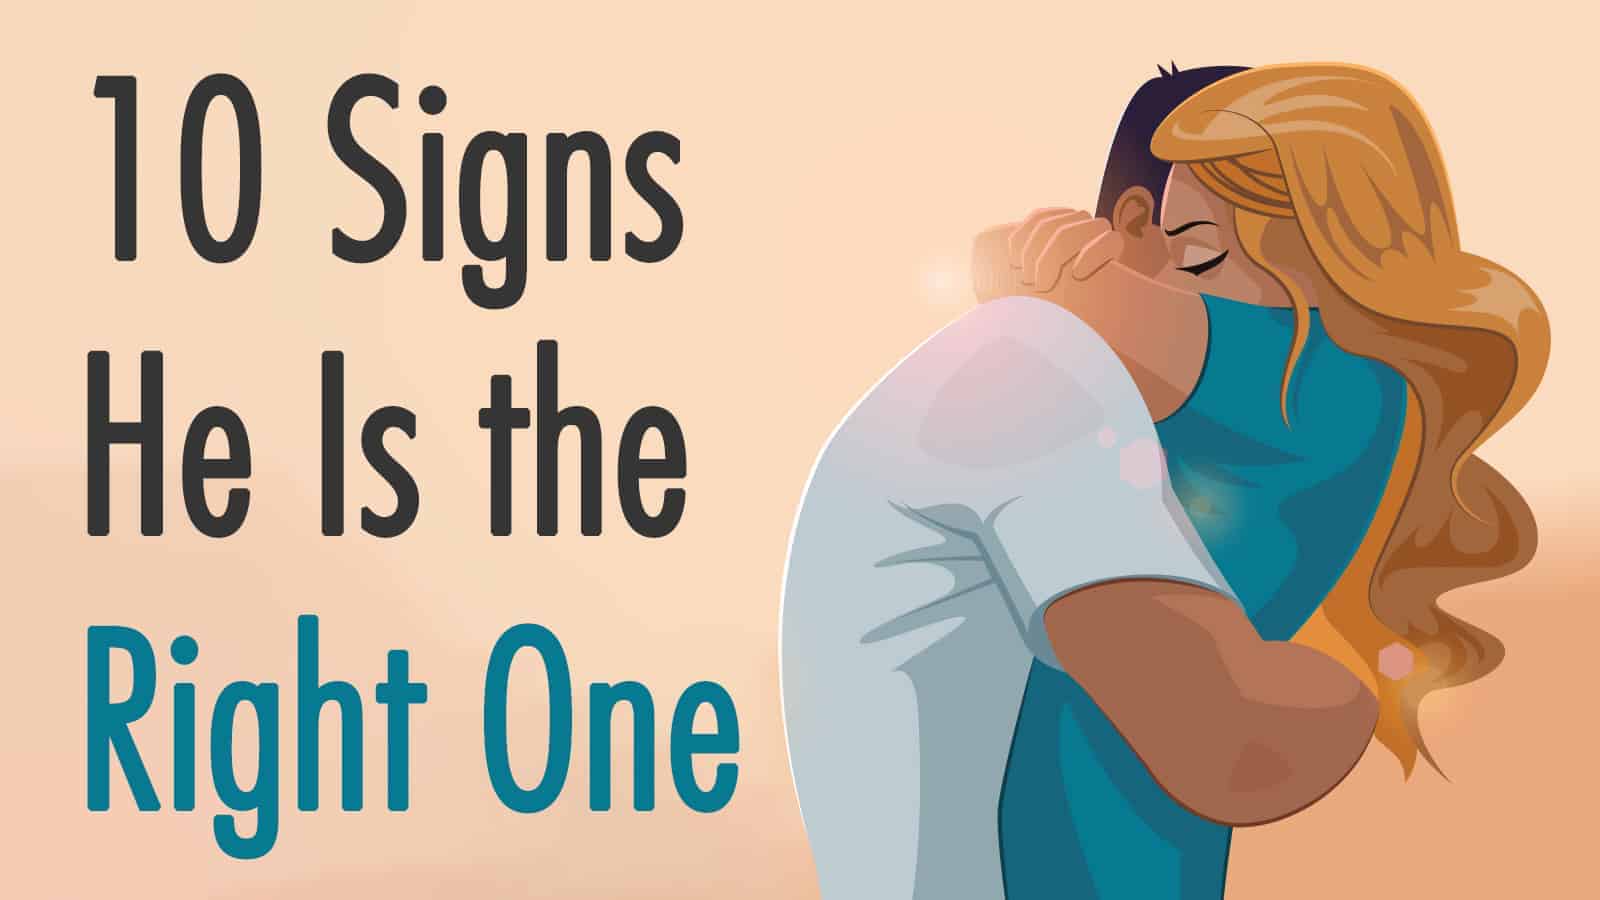 10 Signs He Is the Right One